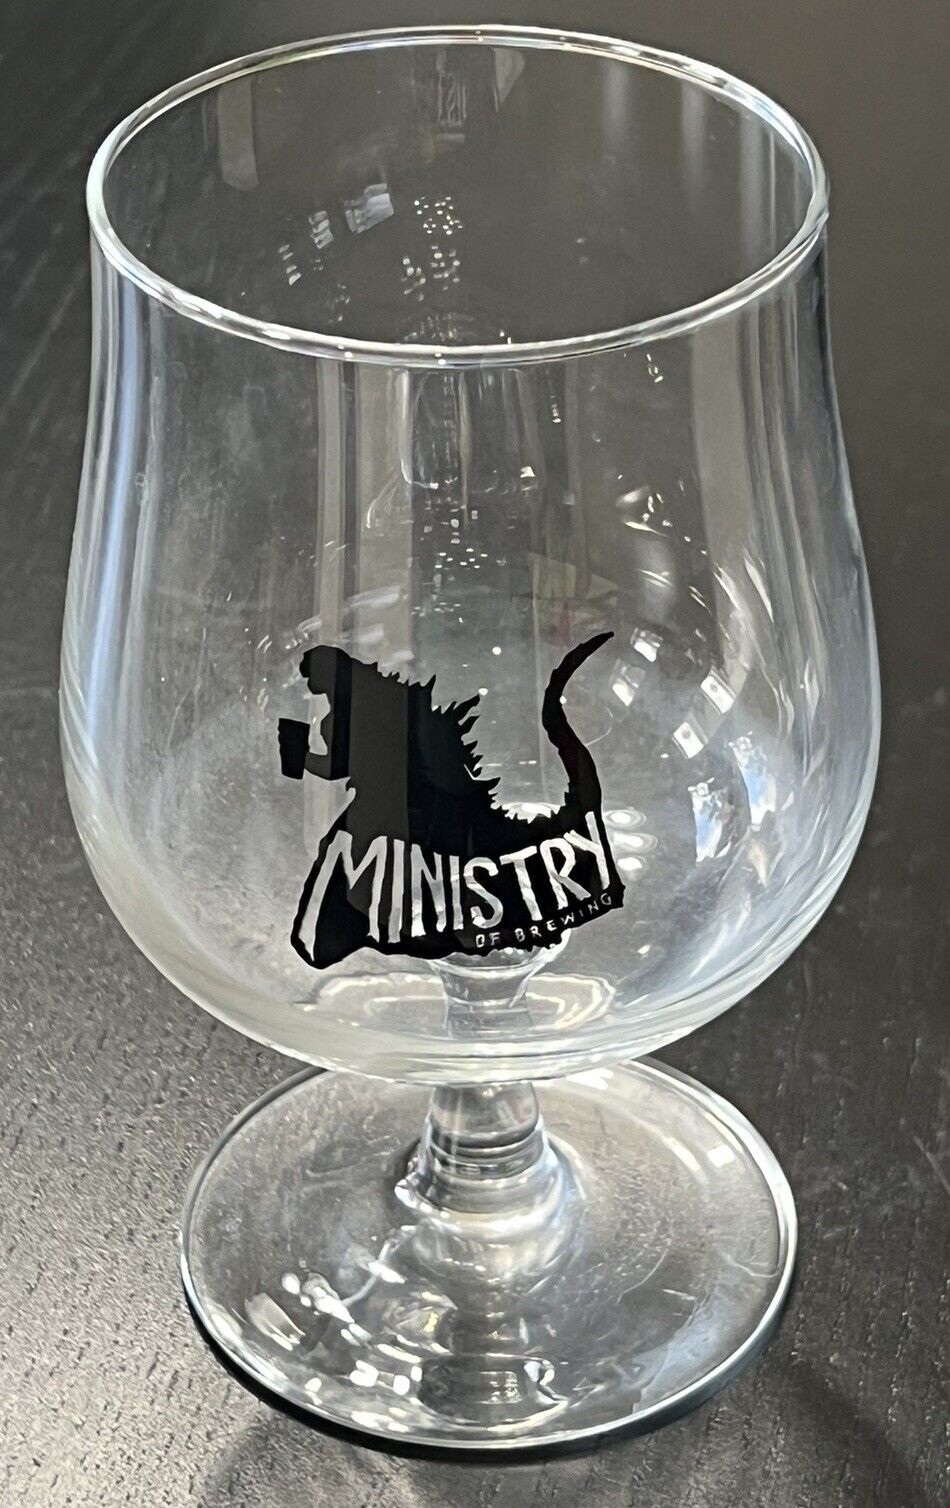 SUPER RARE Ministry of Brewing Godzilla Kaiju 6” Beer Glass - Awesome Design